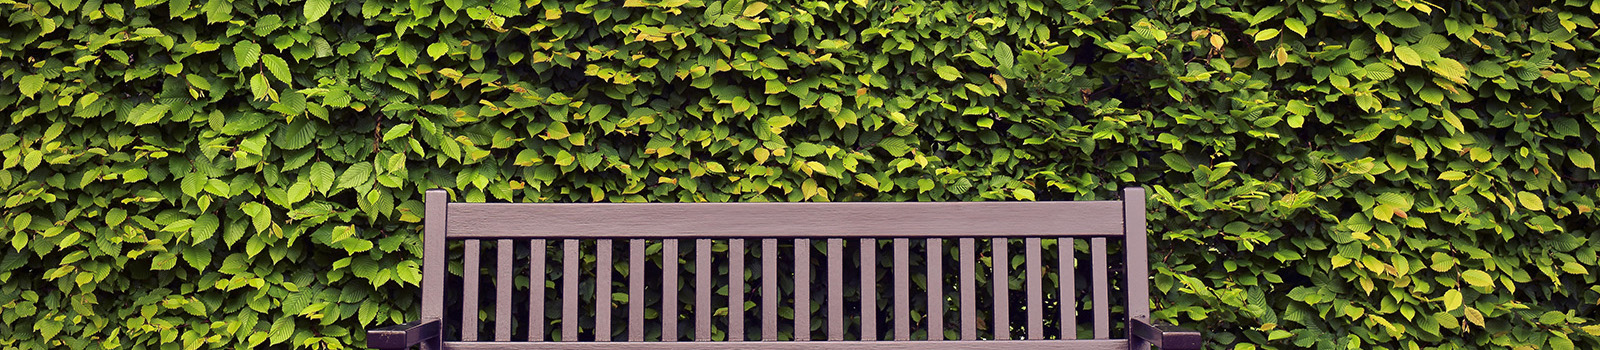 Bench with a high hedge behind it